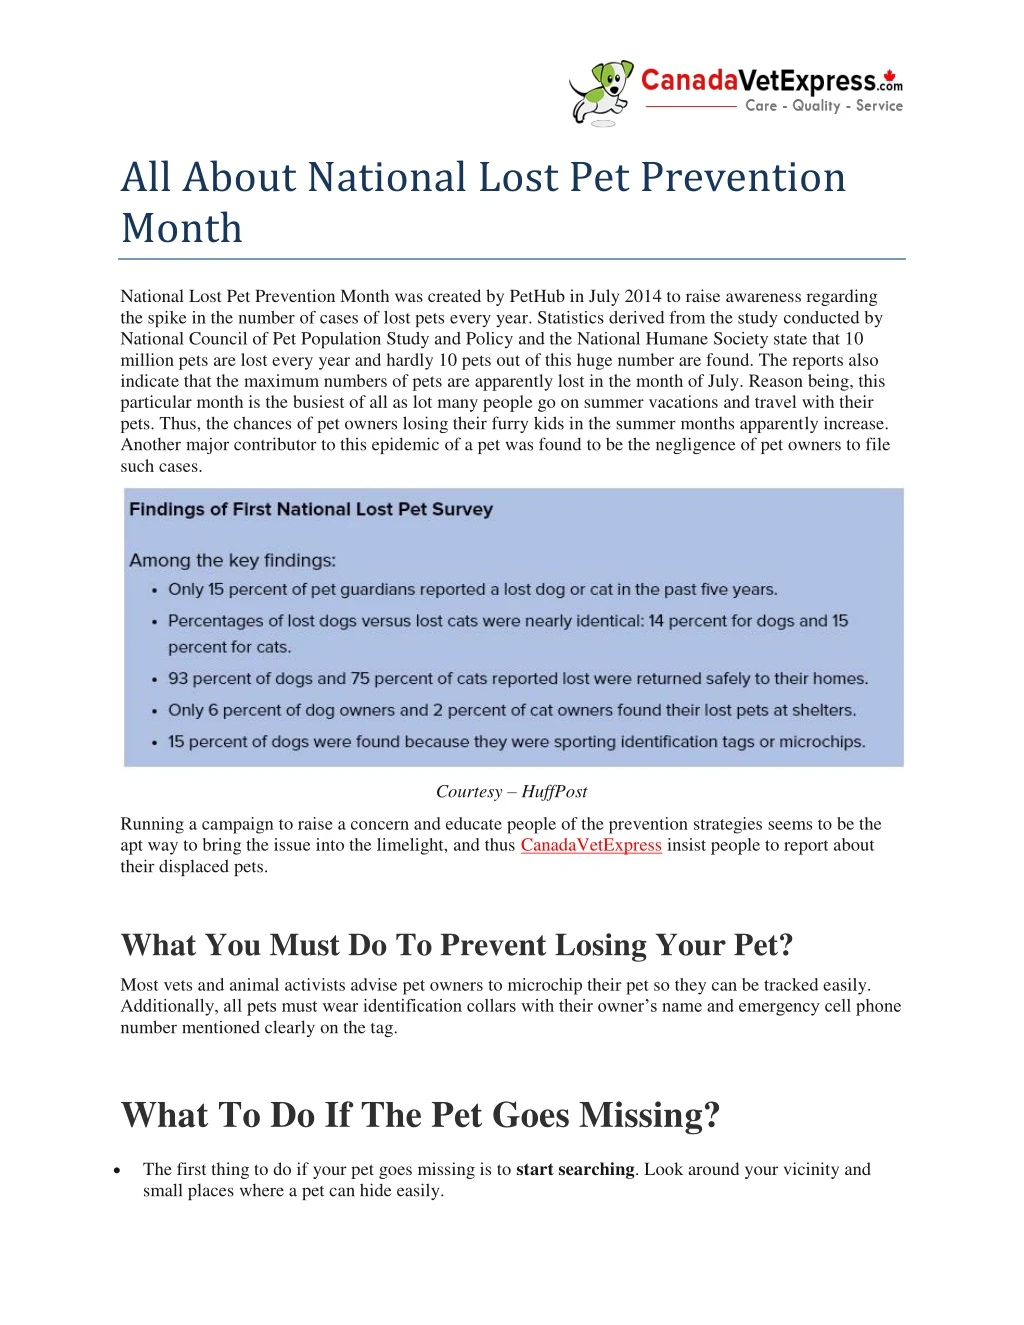 all about national lost pet prevention month